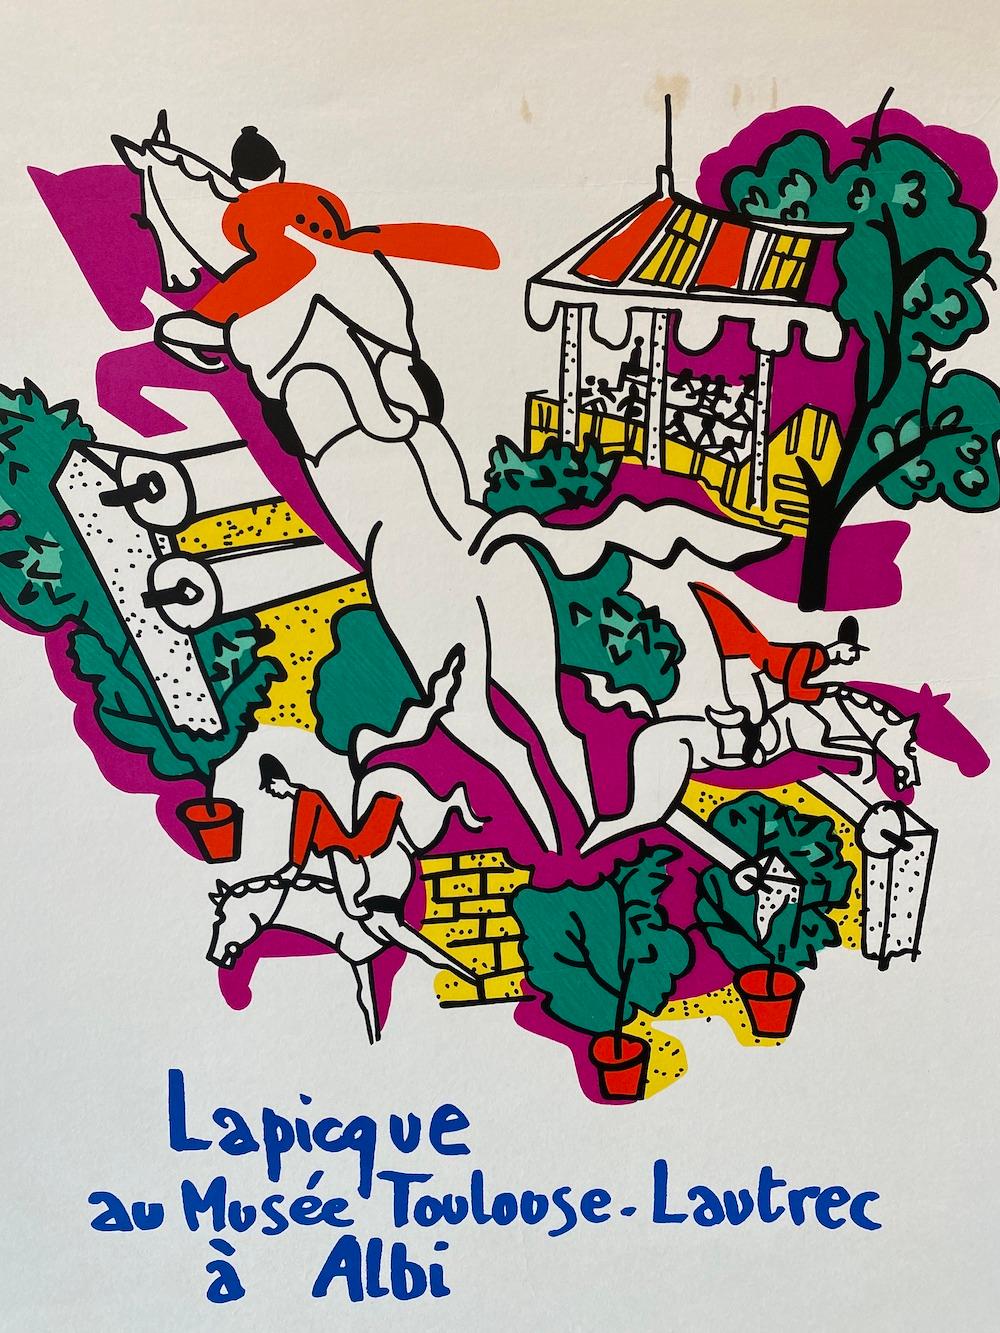 Mid-century Modern Original Art & Exhibition Poster, Charles Lapicque 1970 

Charles Lapicque was a French painter whose work played a significant influential role in the development of post-modern art. This is an original lithograph poster, linen